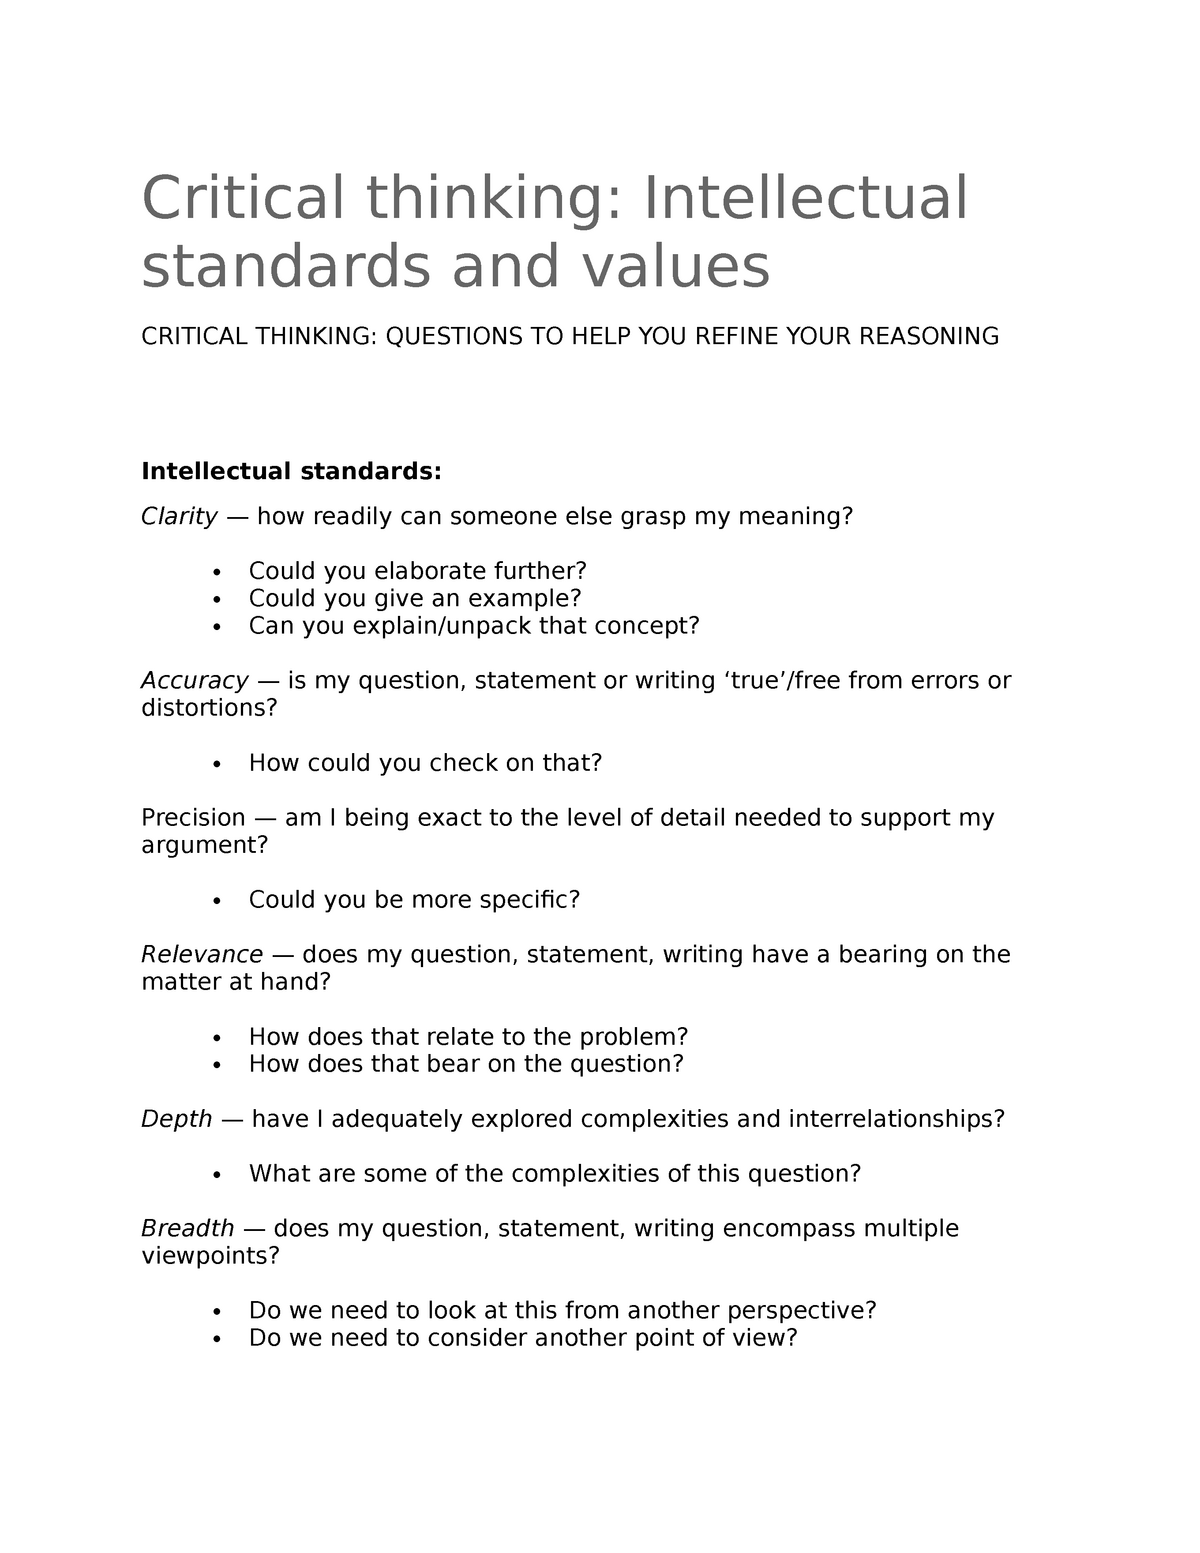 intellectual standards of critical thinking